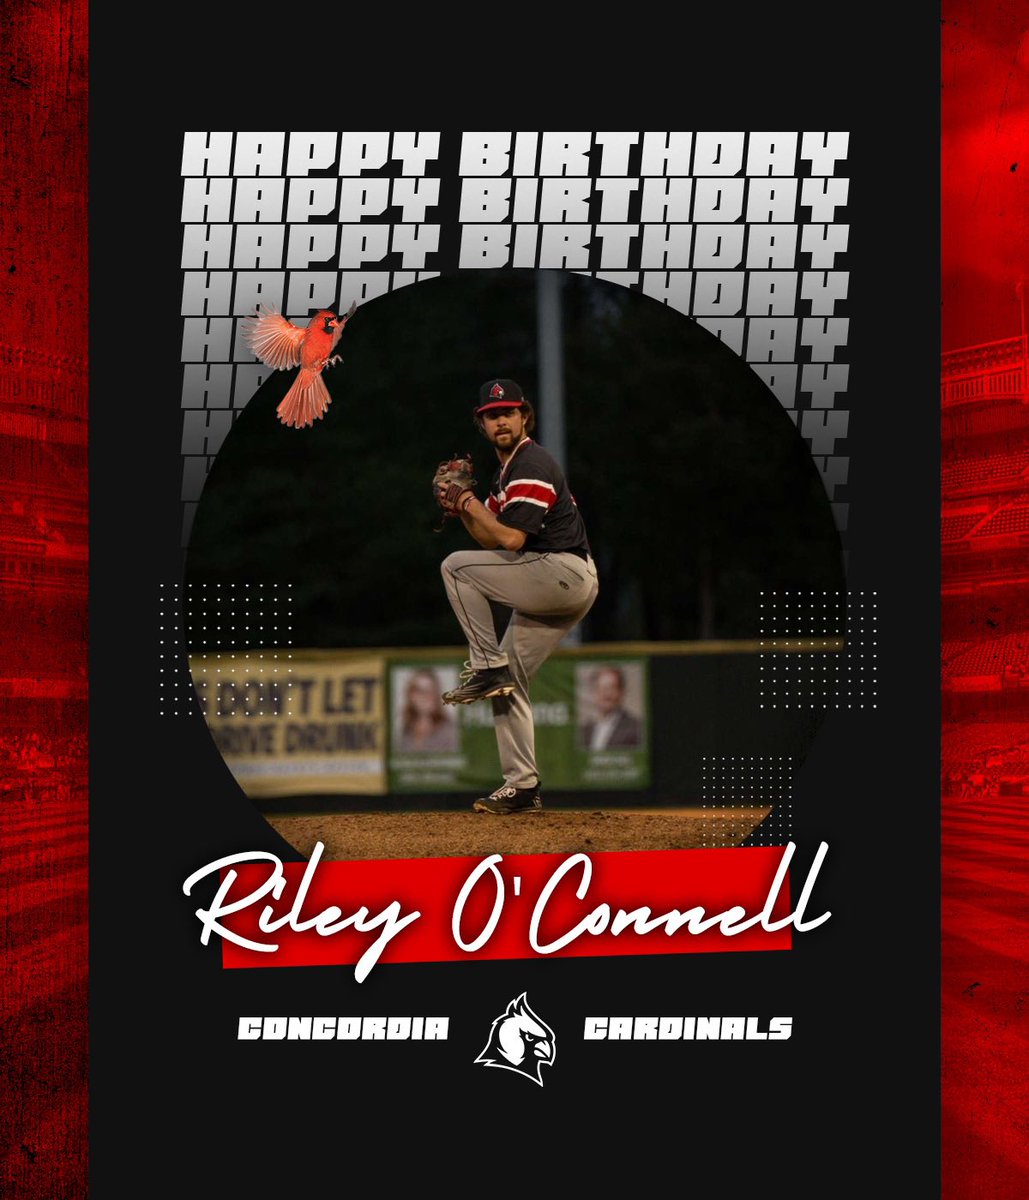 Please join the #DiamondCards in wishing Riley O’Connell (2022-) a happy birthday!